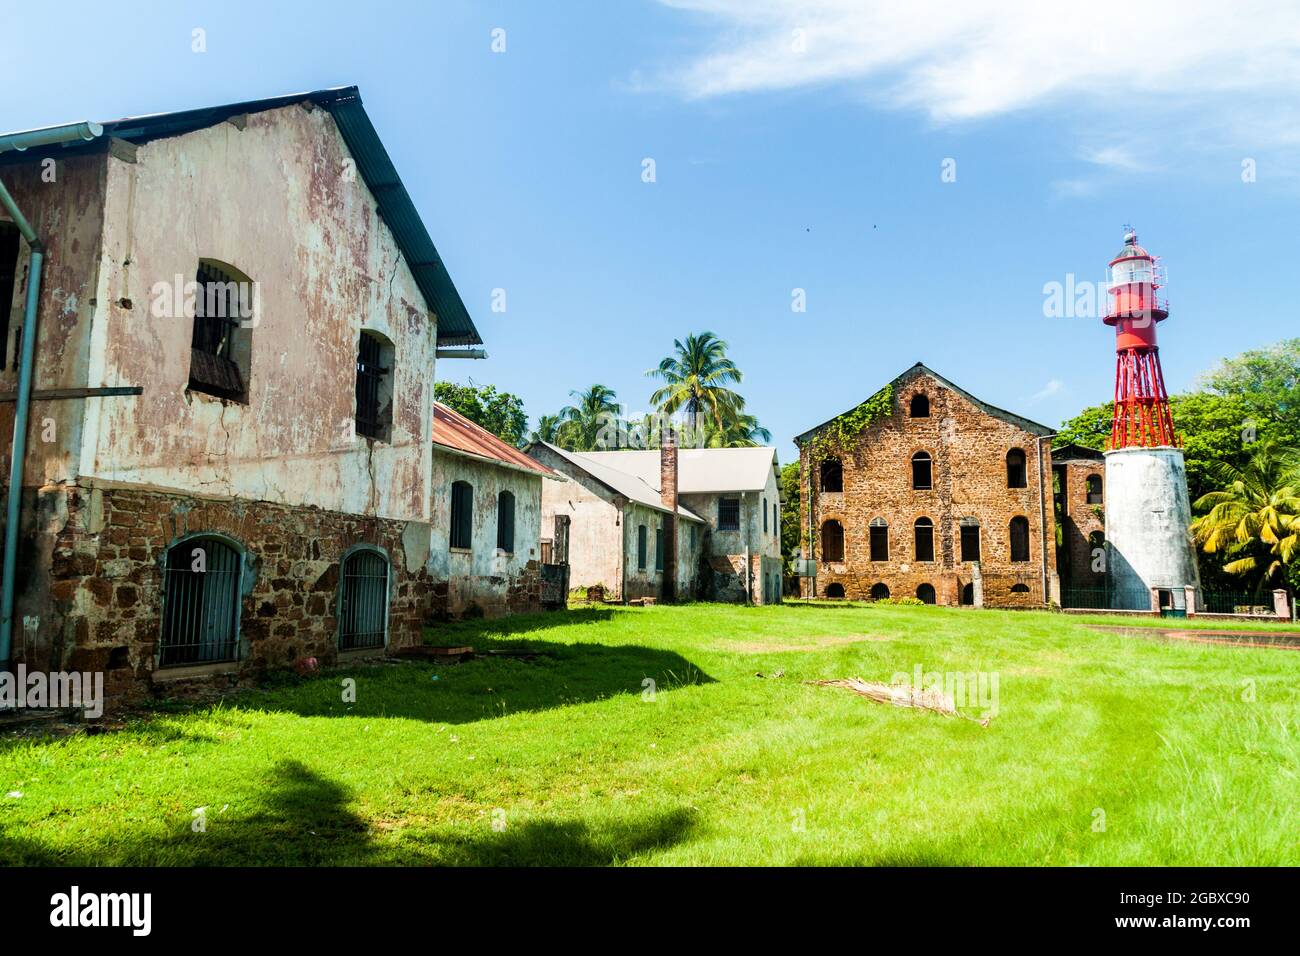 Buildings of former penal colony at Ile Royale, one of the islands of Iles du Salut (Islands of Salvation) in French Guiana Stock Photo